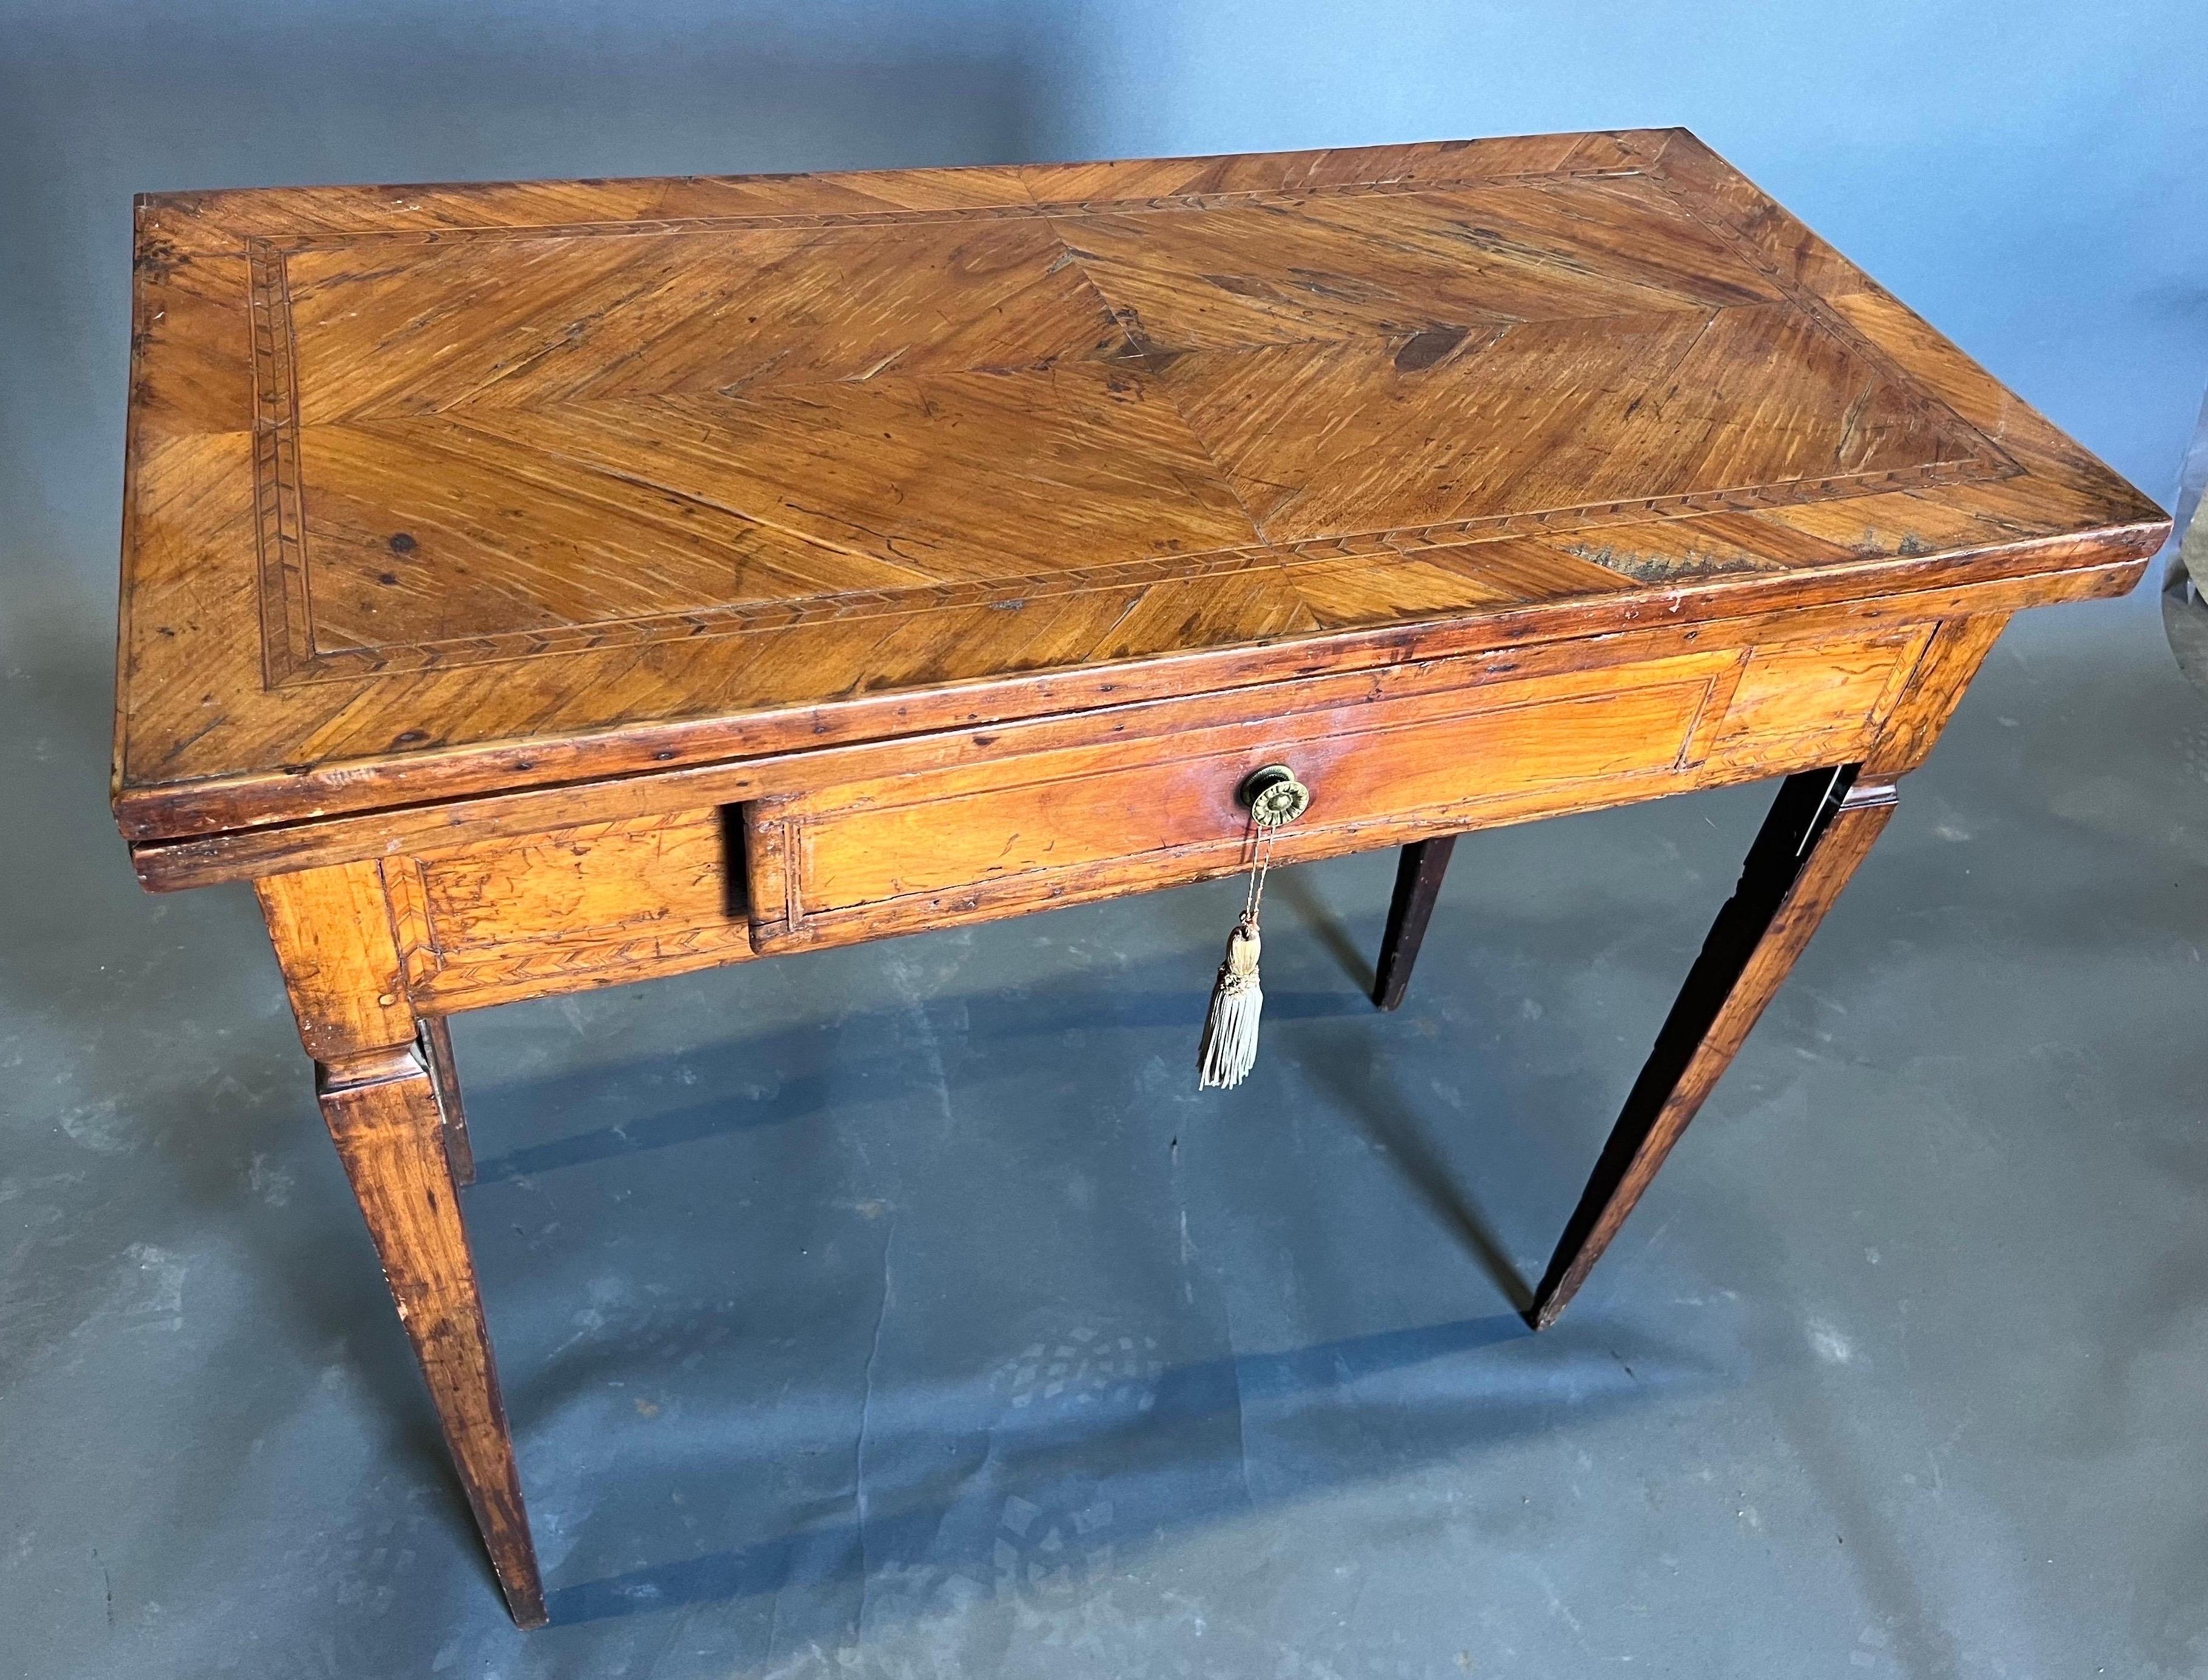 Attractive Late 18th century Italian neoclassical inlaid games table with double swing back legs to fold over top. Great color and quality walnut veneers.